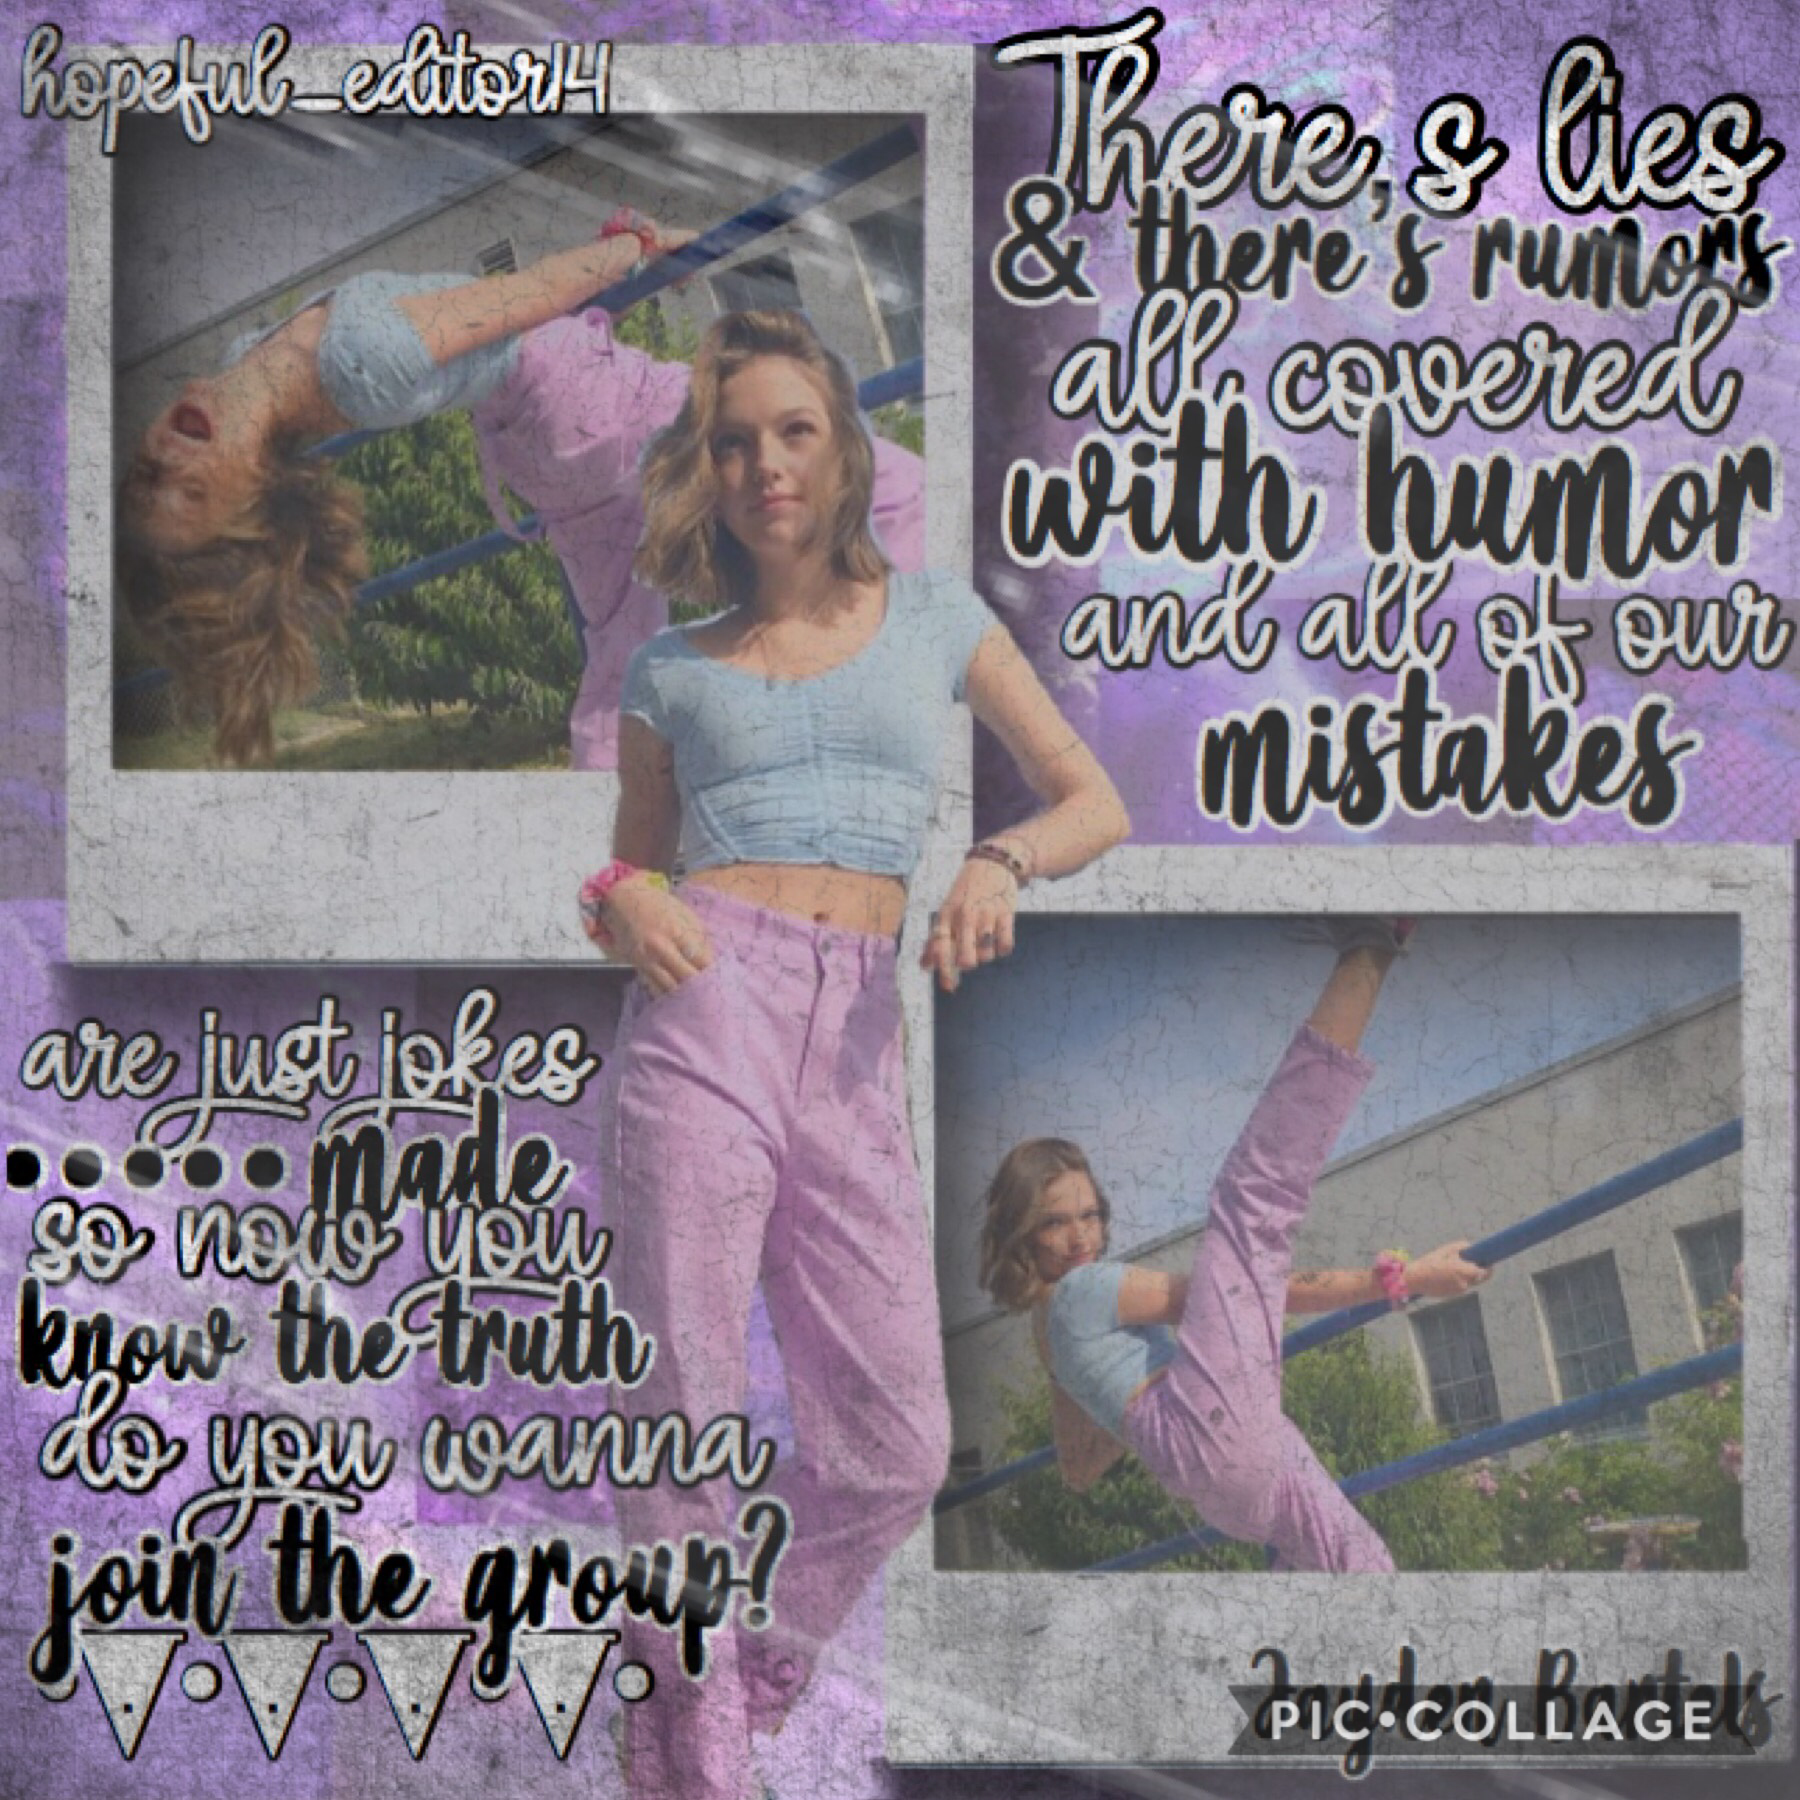 RaNdOm MiDdAy PoSt (t a p)
Jayden Bartels has a new song called “the group” and I really like it. What do you think of this style I’ve been doing? I kinda love it!